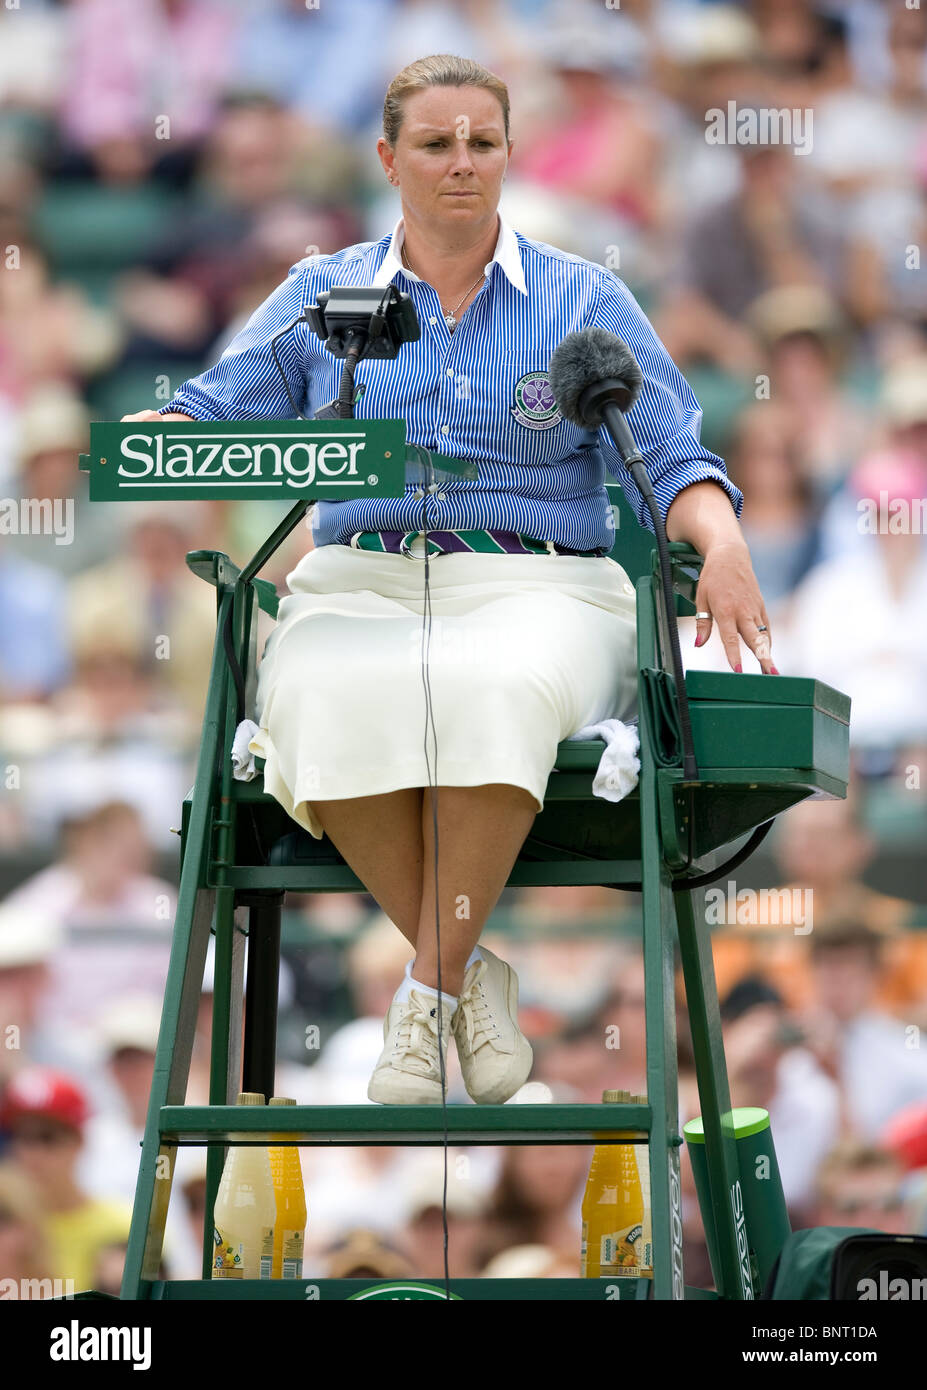 Tennis Umpire Chair High Resolution Stock Photography and Images - Alamy